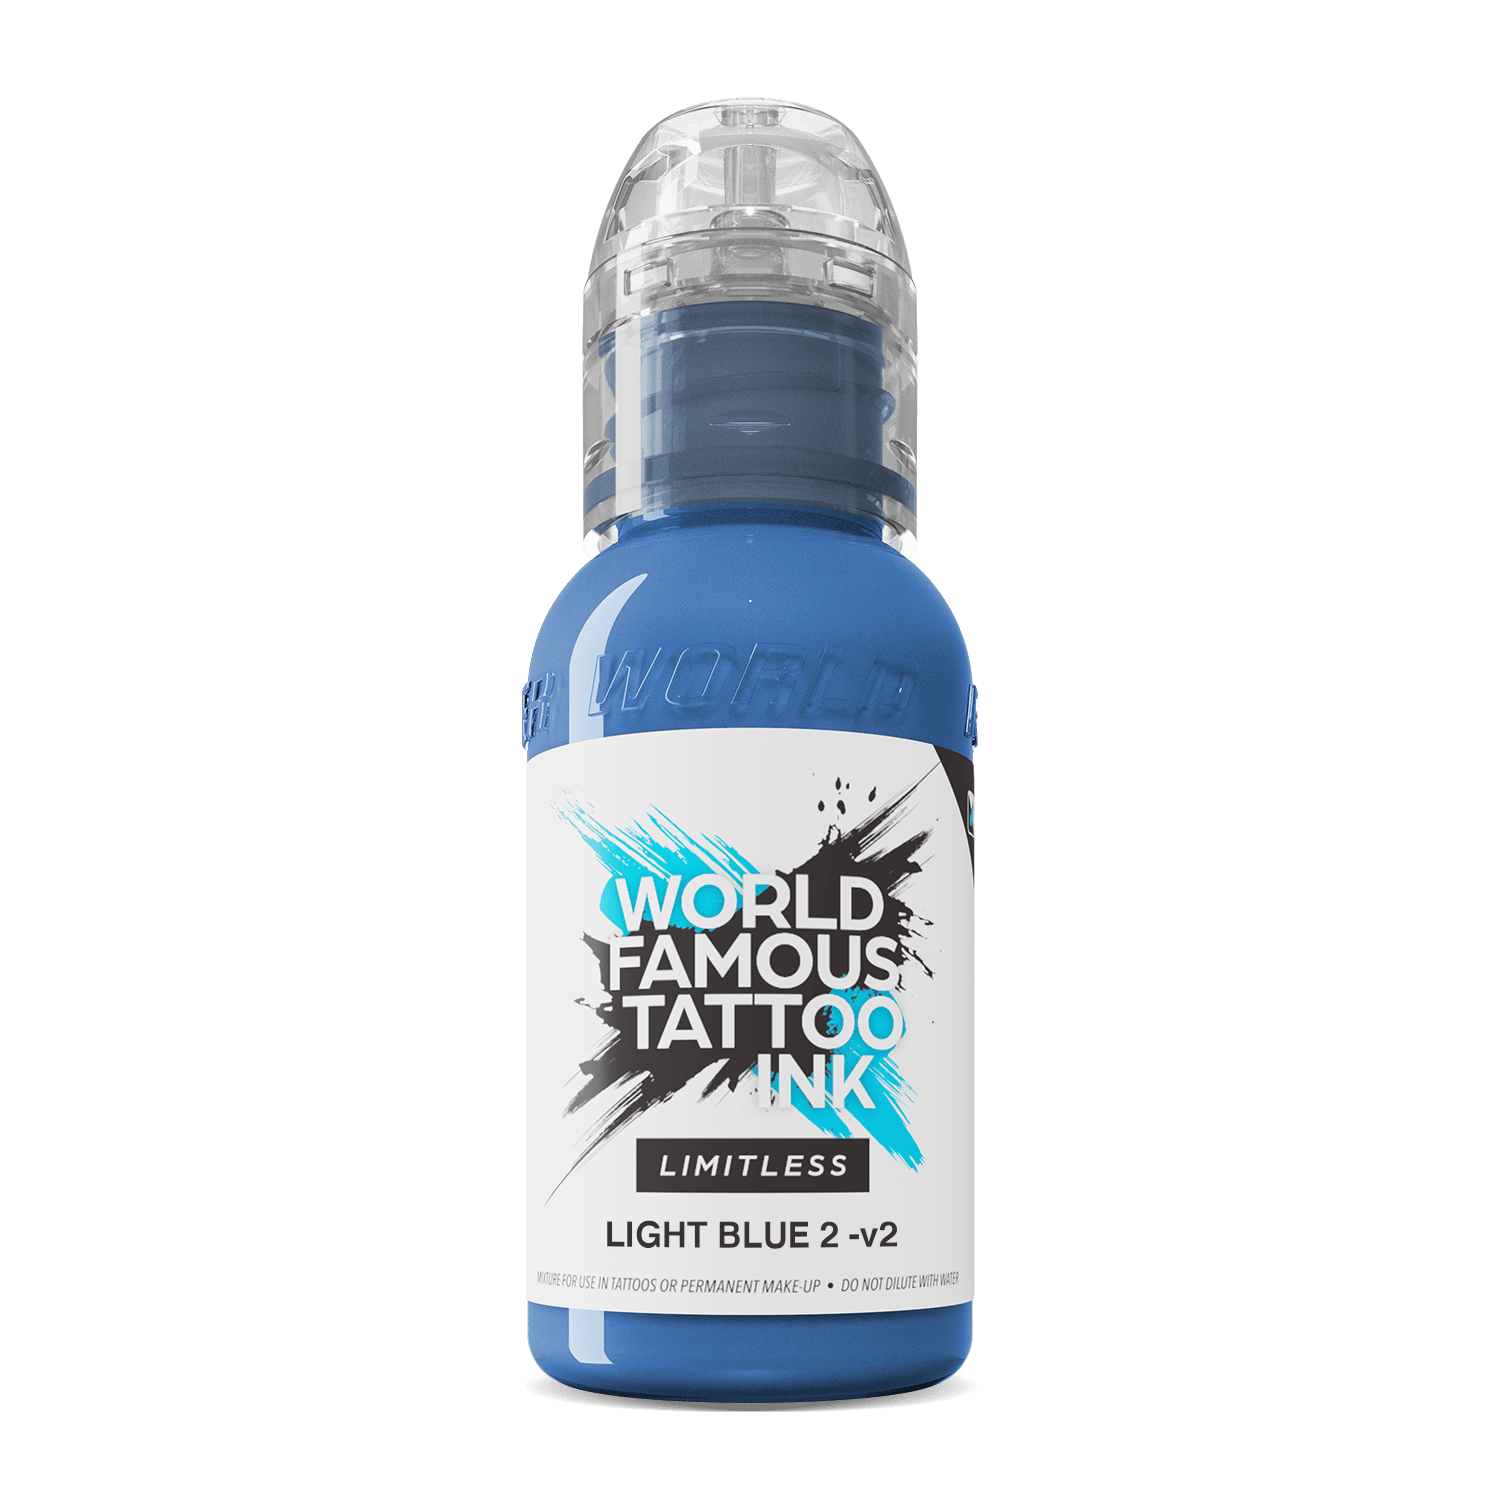 World Famous Tattoo Ink Limitless Blue 2 v2